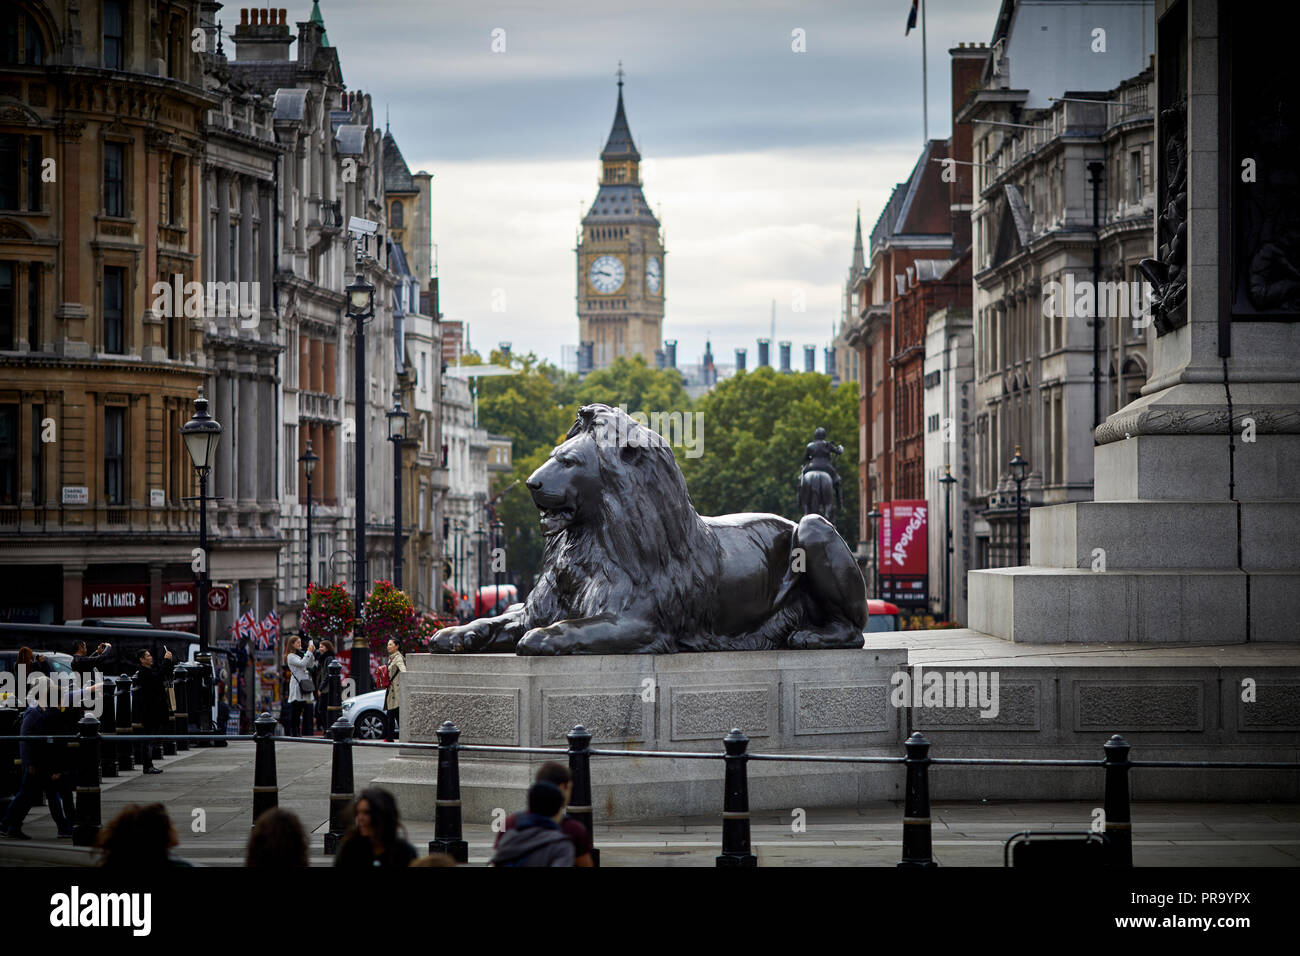 Landmark Trafalgar Square lions City of Westminster framed by Big Ben clocktower in London the capital city of England Stock Photo